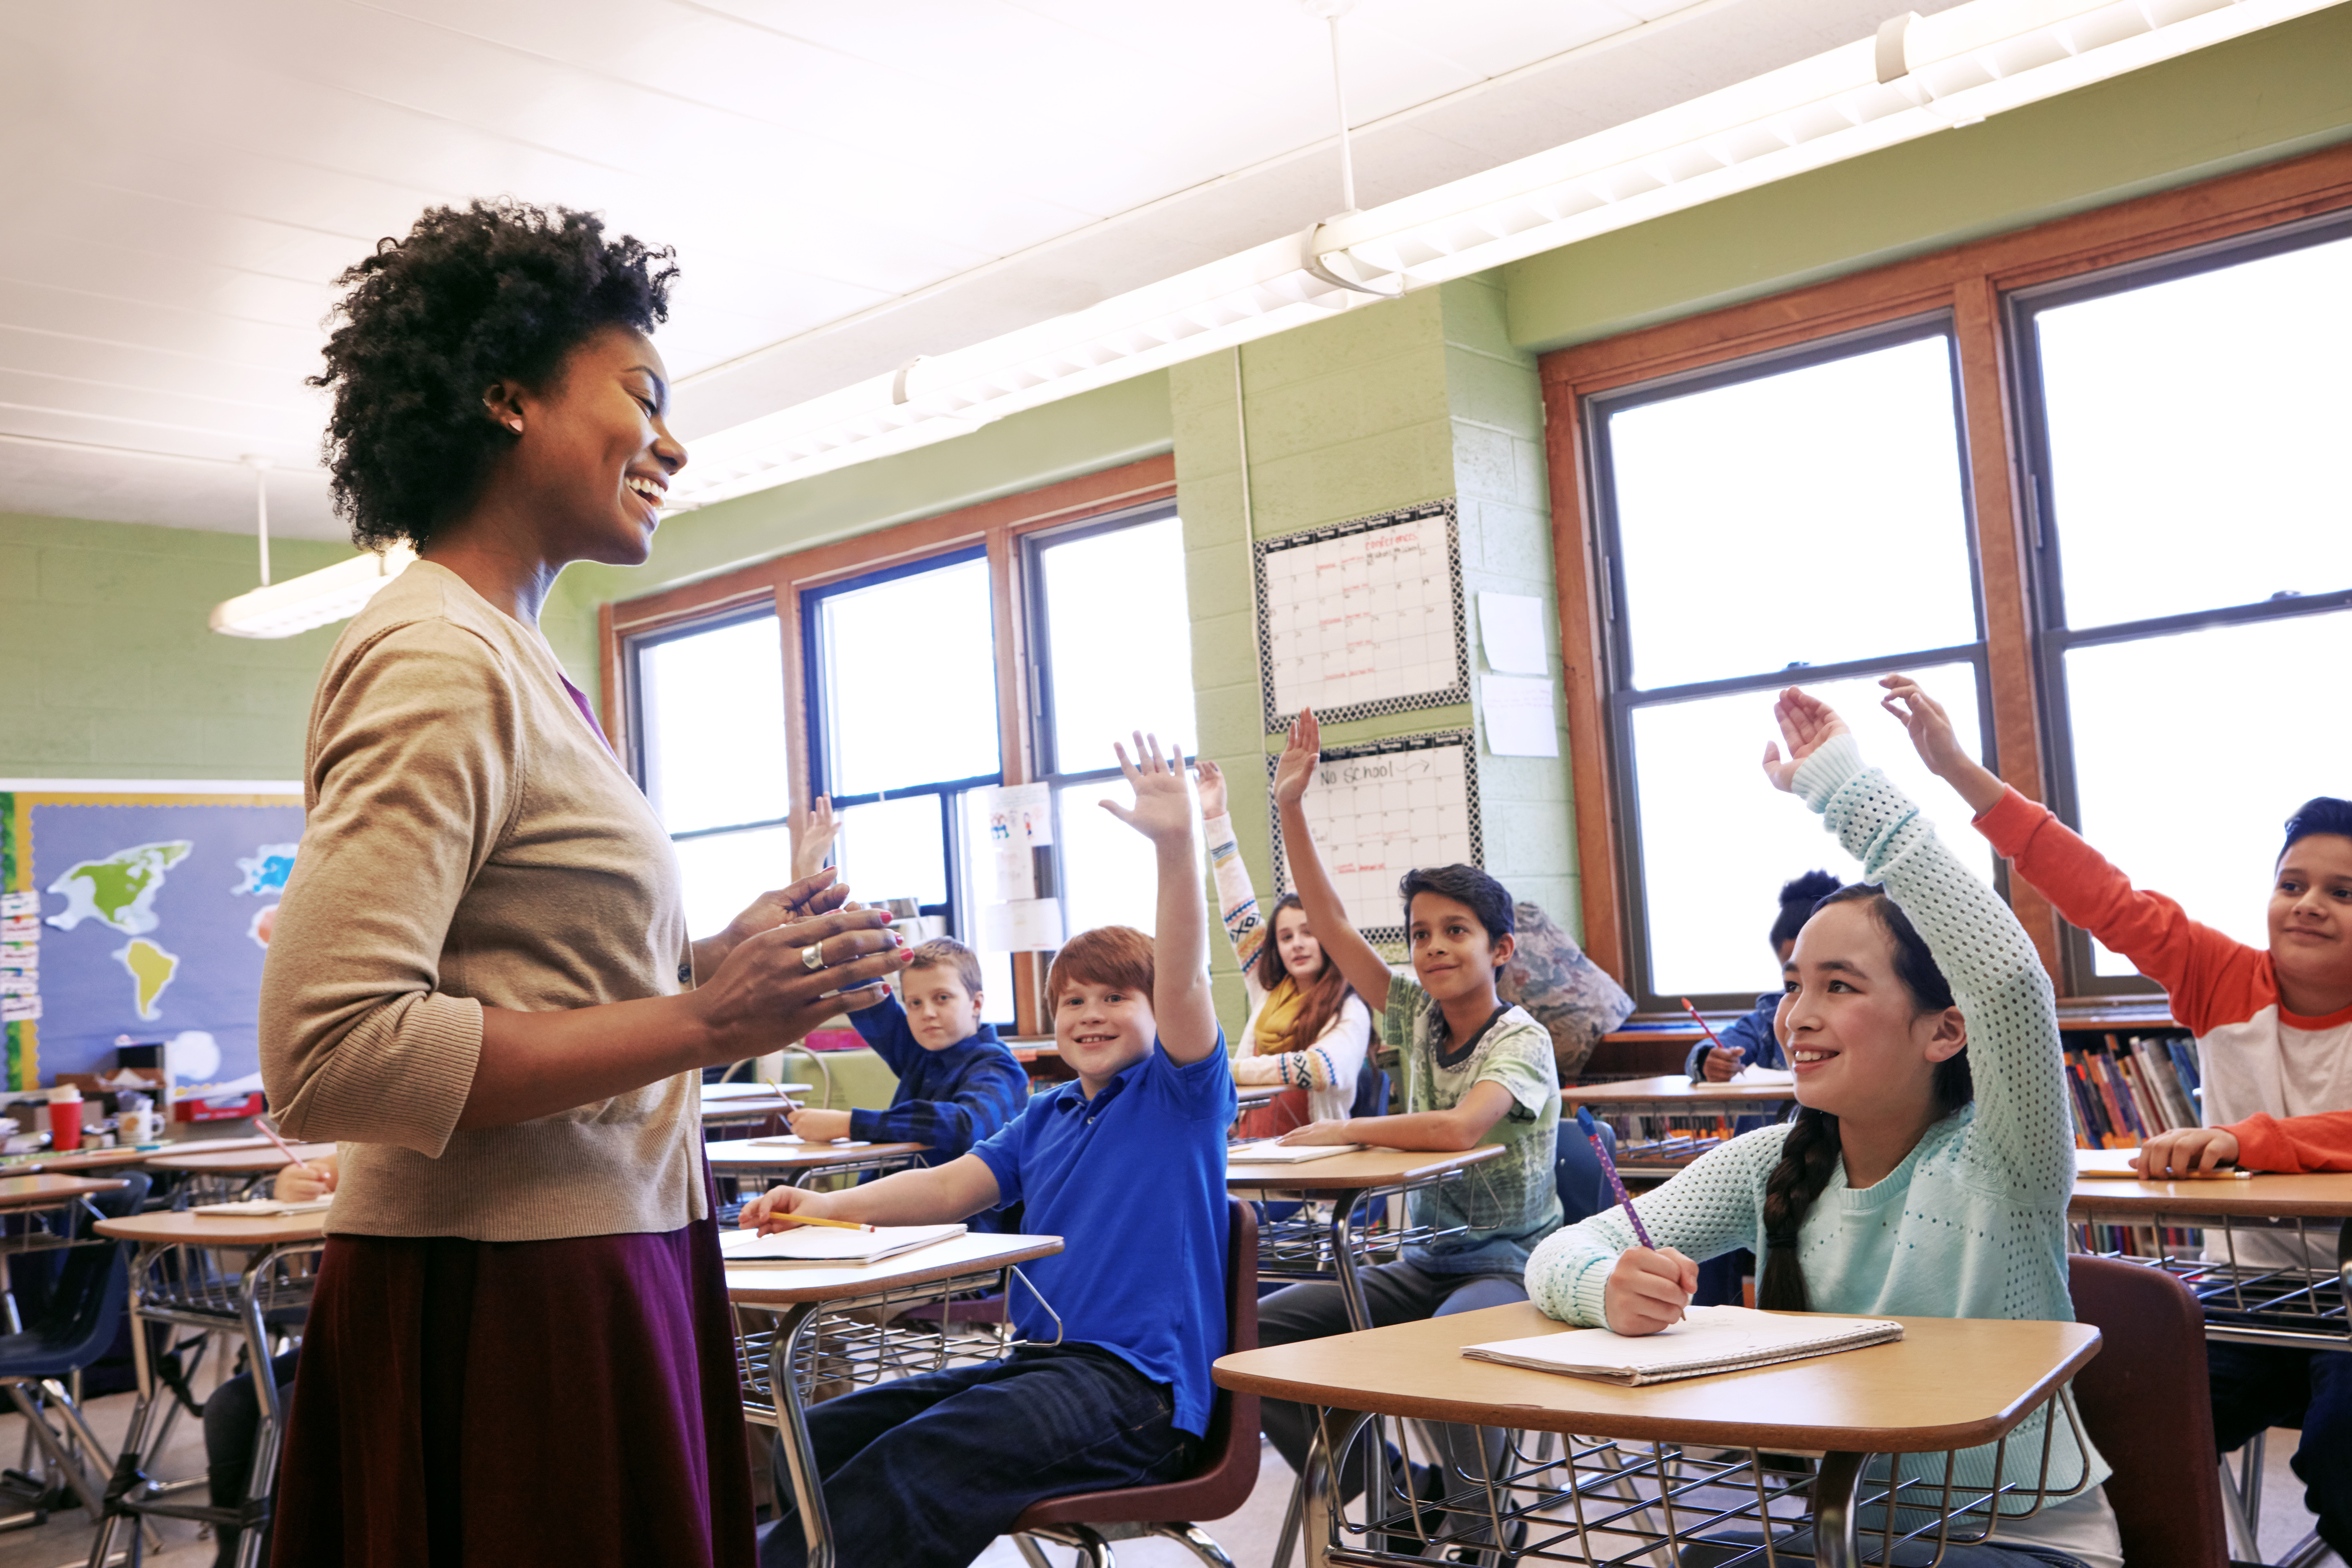 Image shows a female teacher in the foreground smiling and looking at her students who are all sitting at their desks. Each student has their hand raised and is looking excitedly at their teacher.